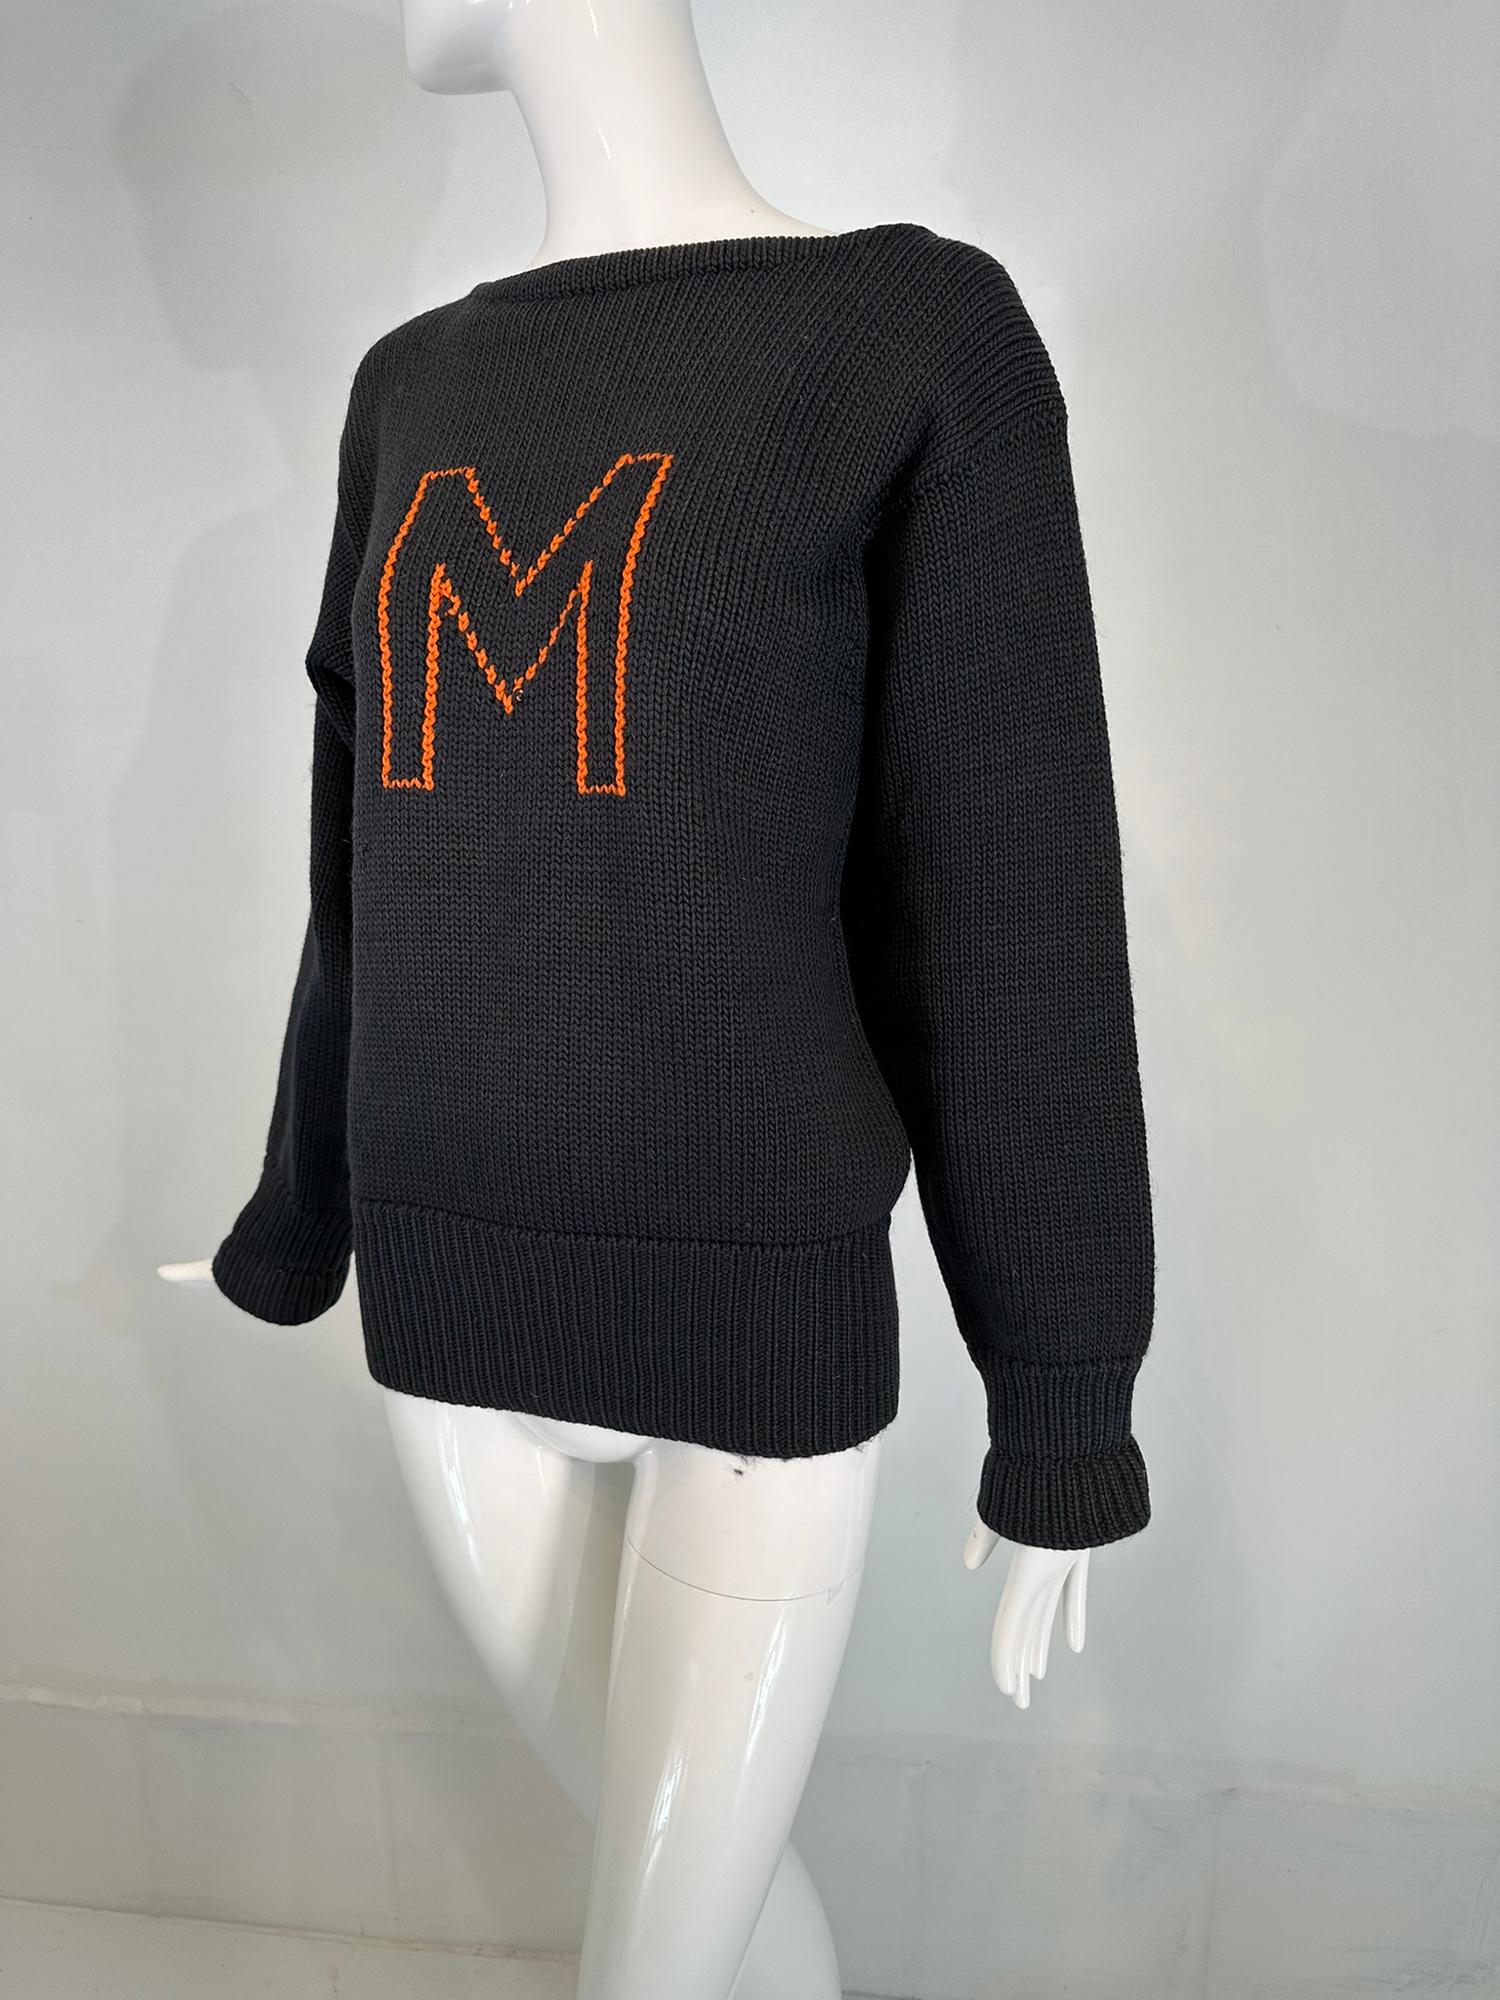 Milton Academy Mass. Early 1900s Varsity Knit School Sweater Blue & Orange In Good Condition For Sale In West Palm Beach, FL